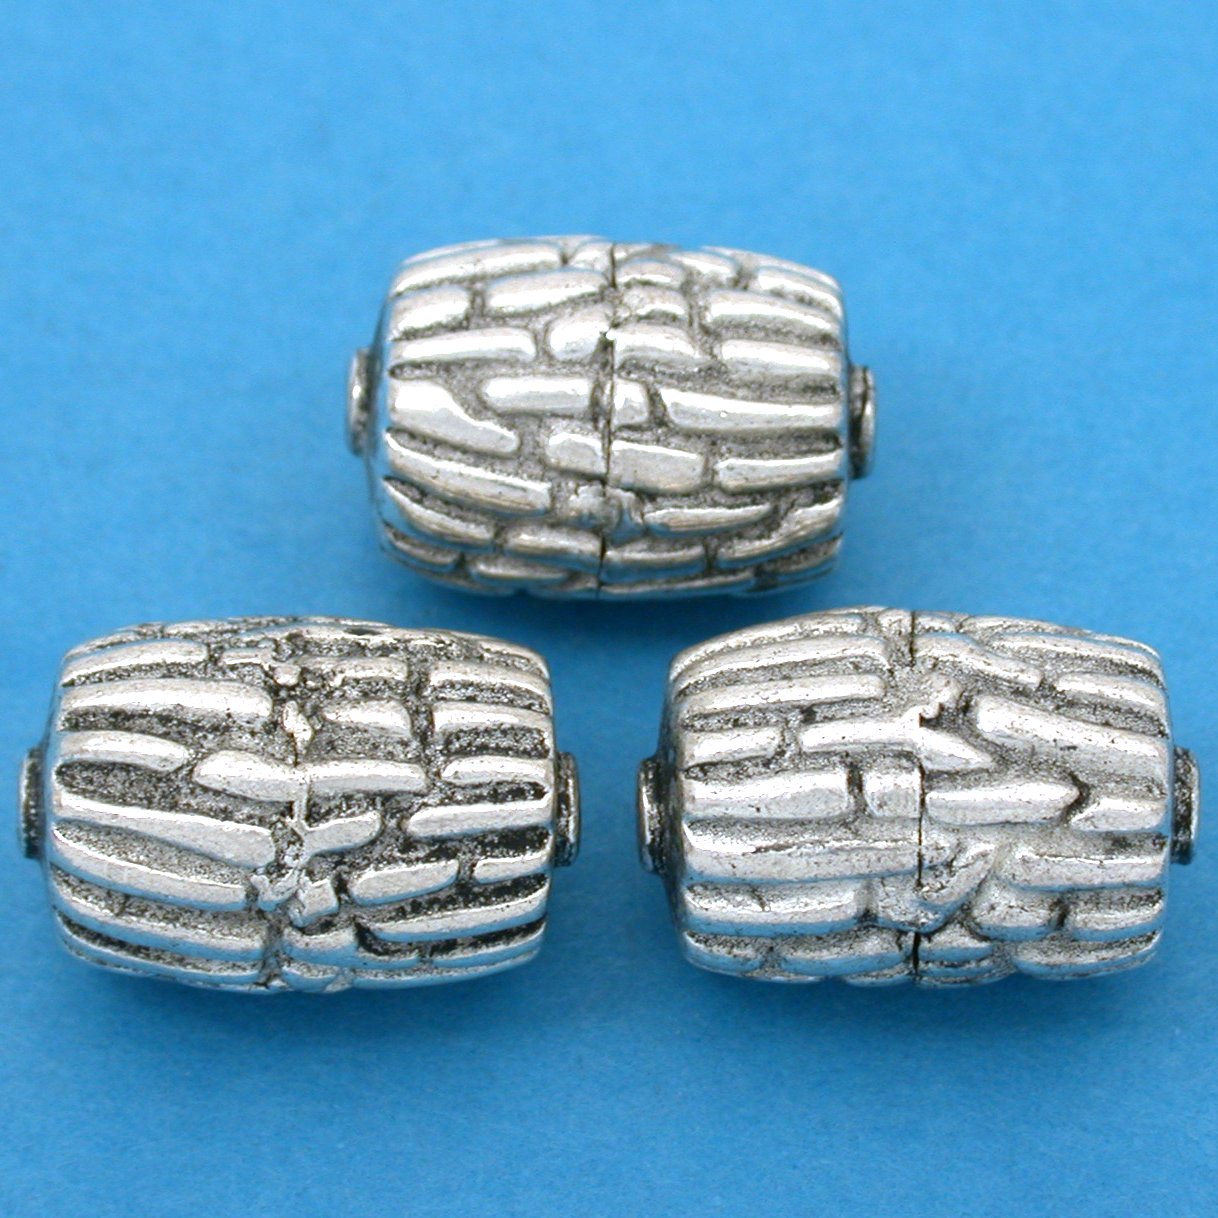 Bali Barrel Antique Silver Plated Beads 19mm 20 Grams 3Pcs Approx.